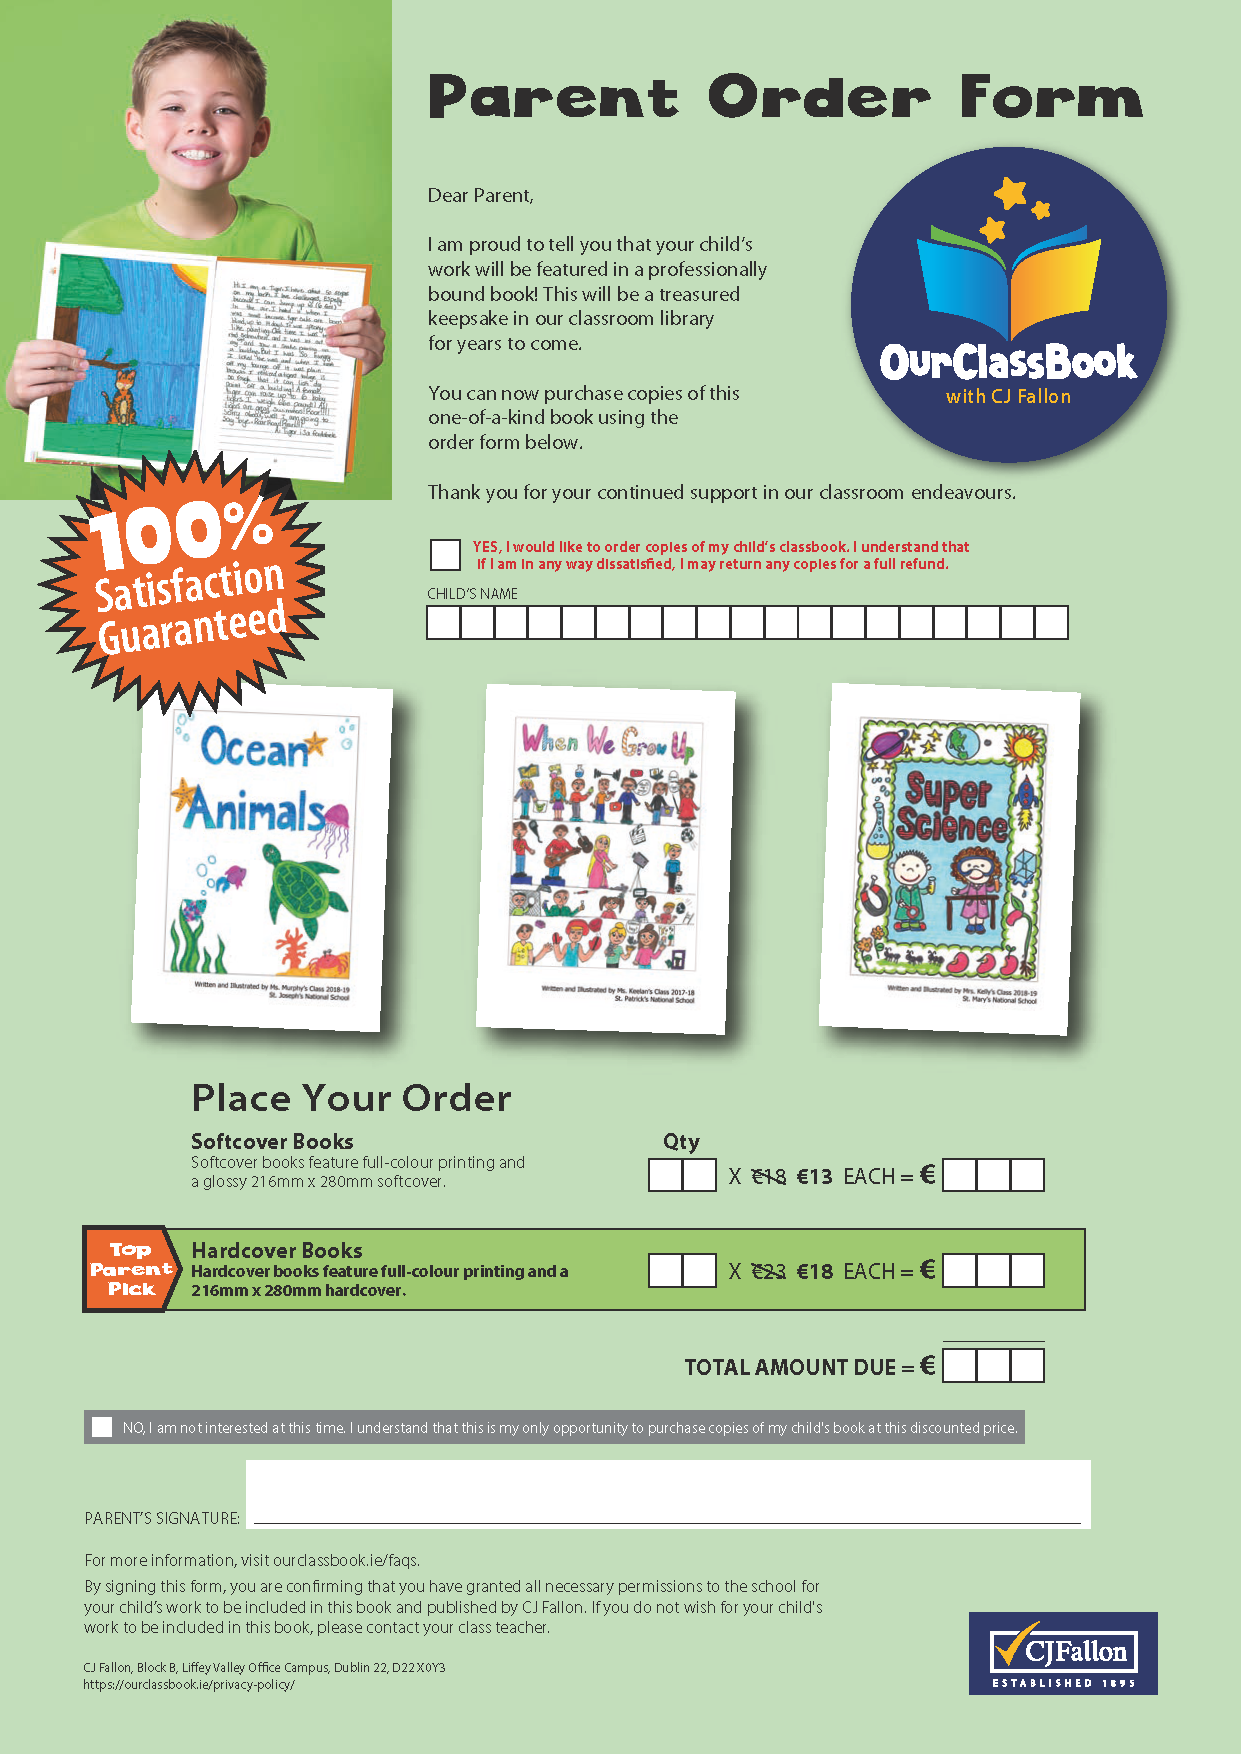 OurClassBook Parent Order Form for Student Published Book